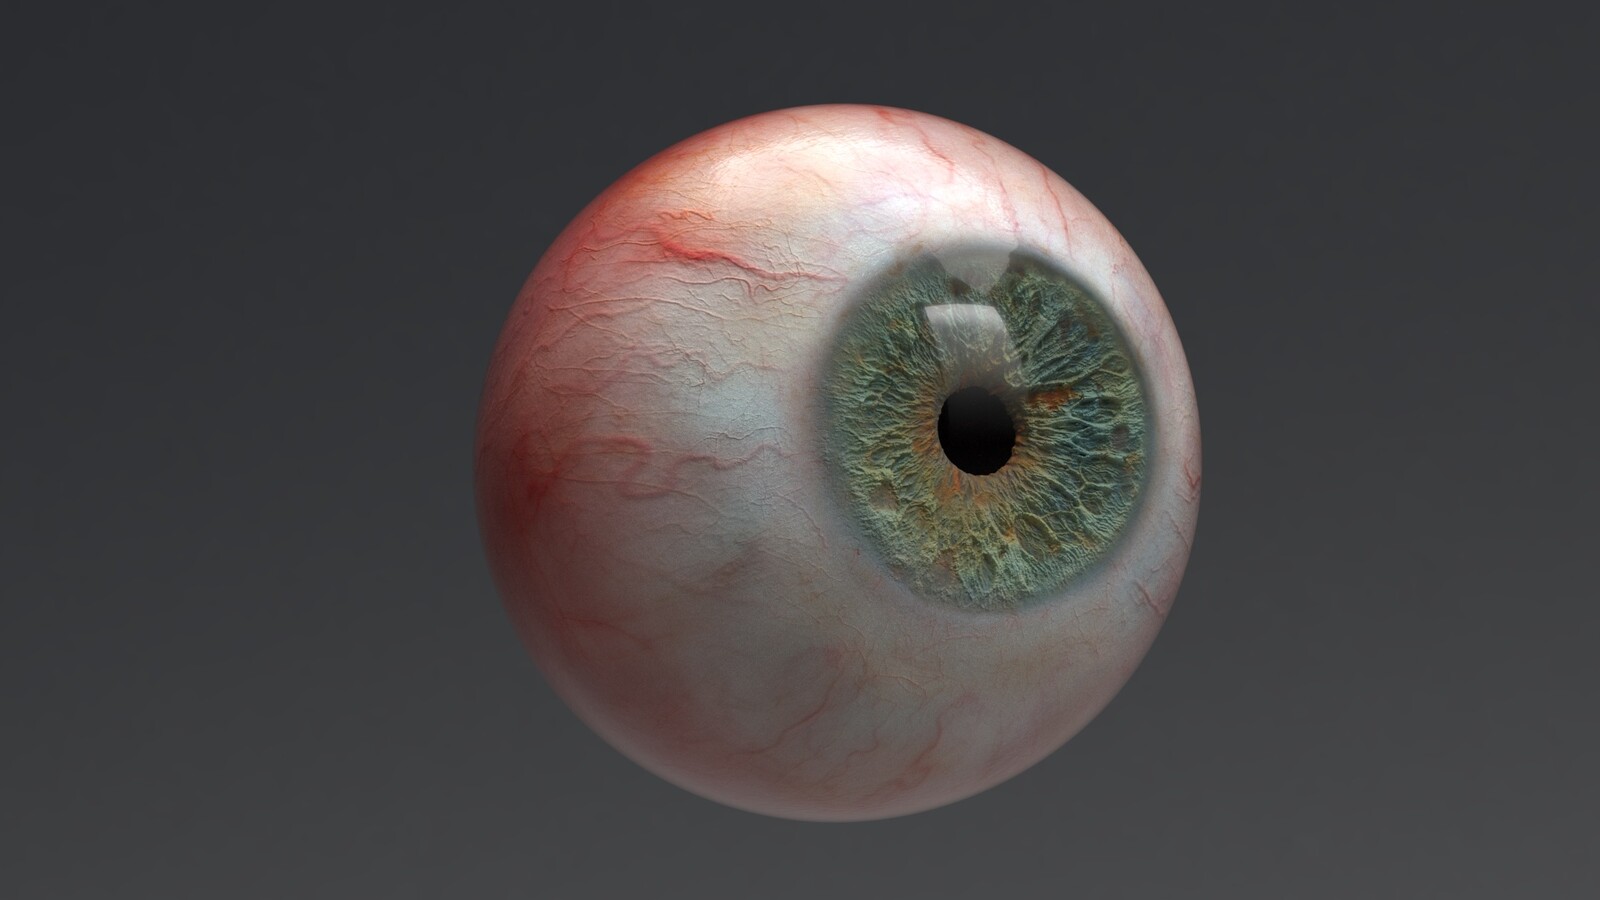 Look development of photorealistic eyes for the character.